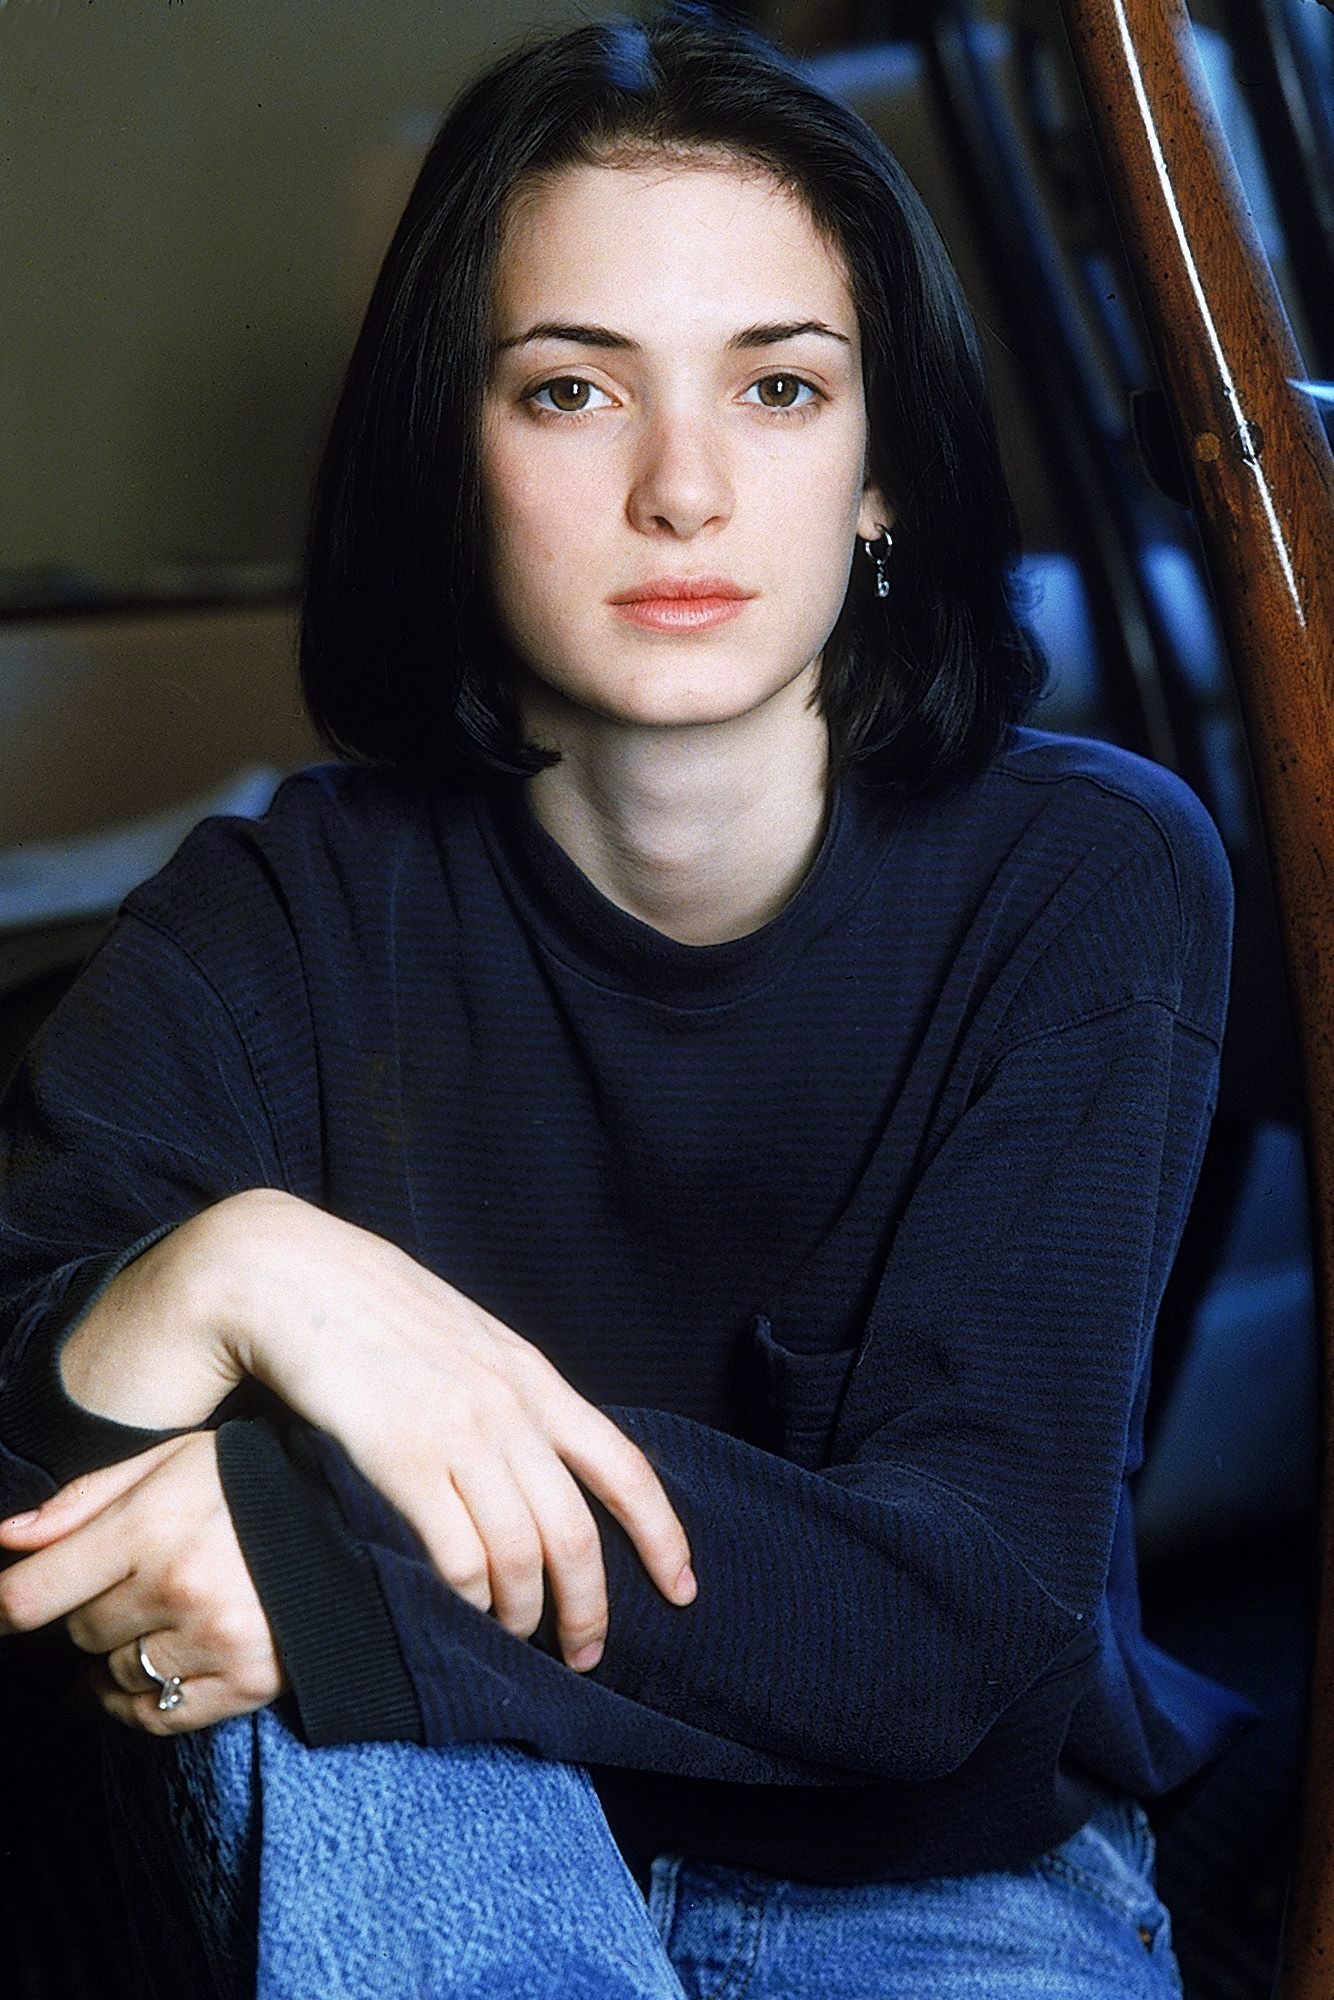 166852 1920x1080 Winona Ryder  Rare Gallery HD Wallpapers